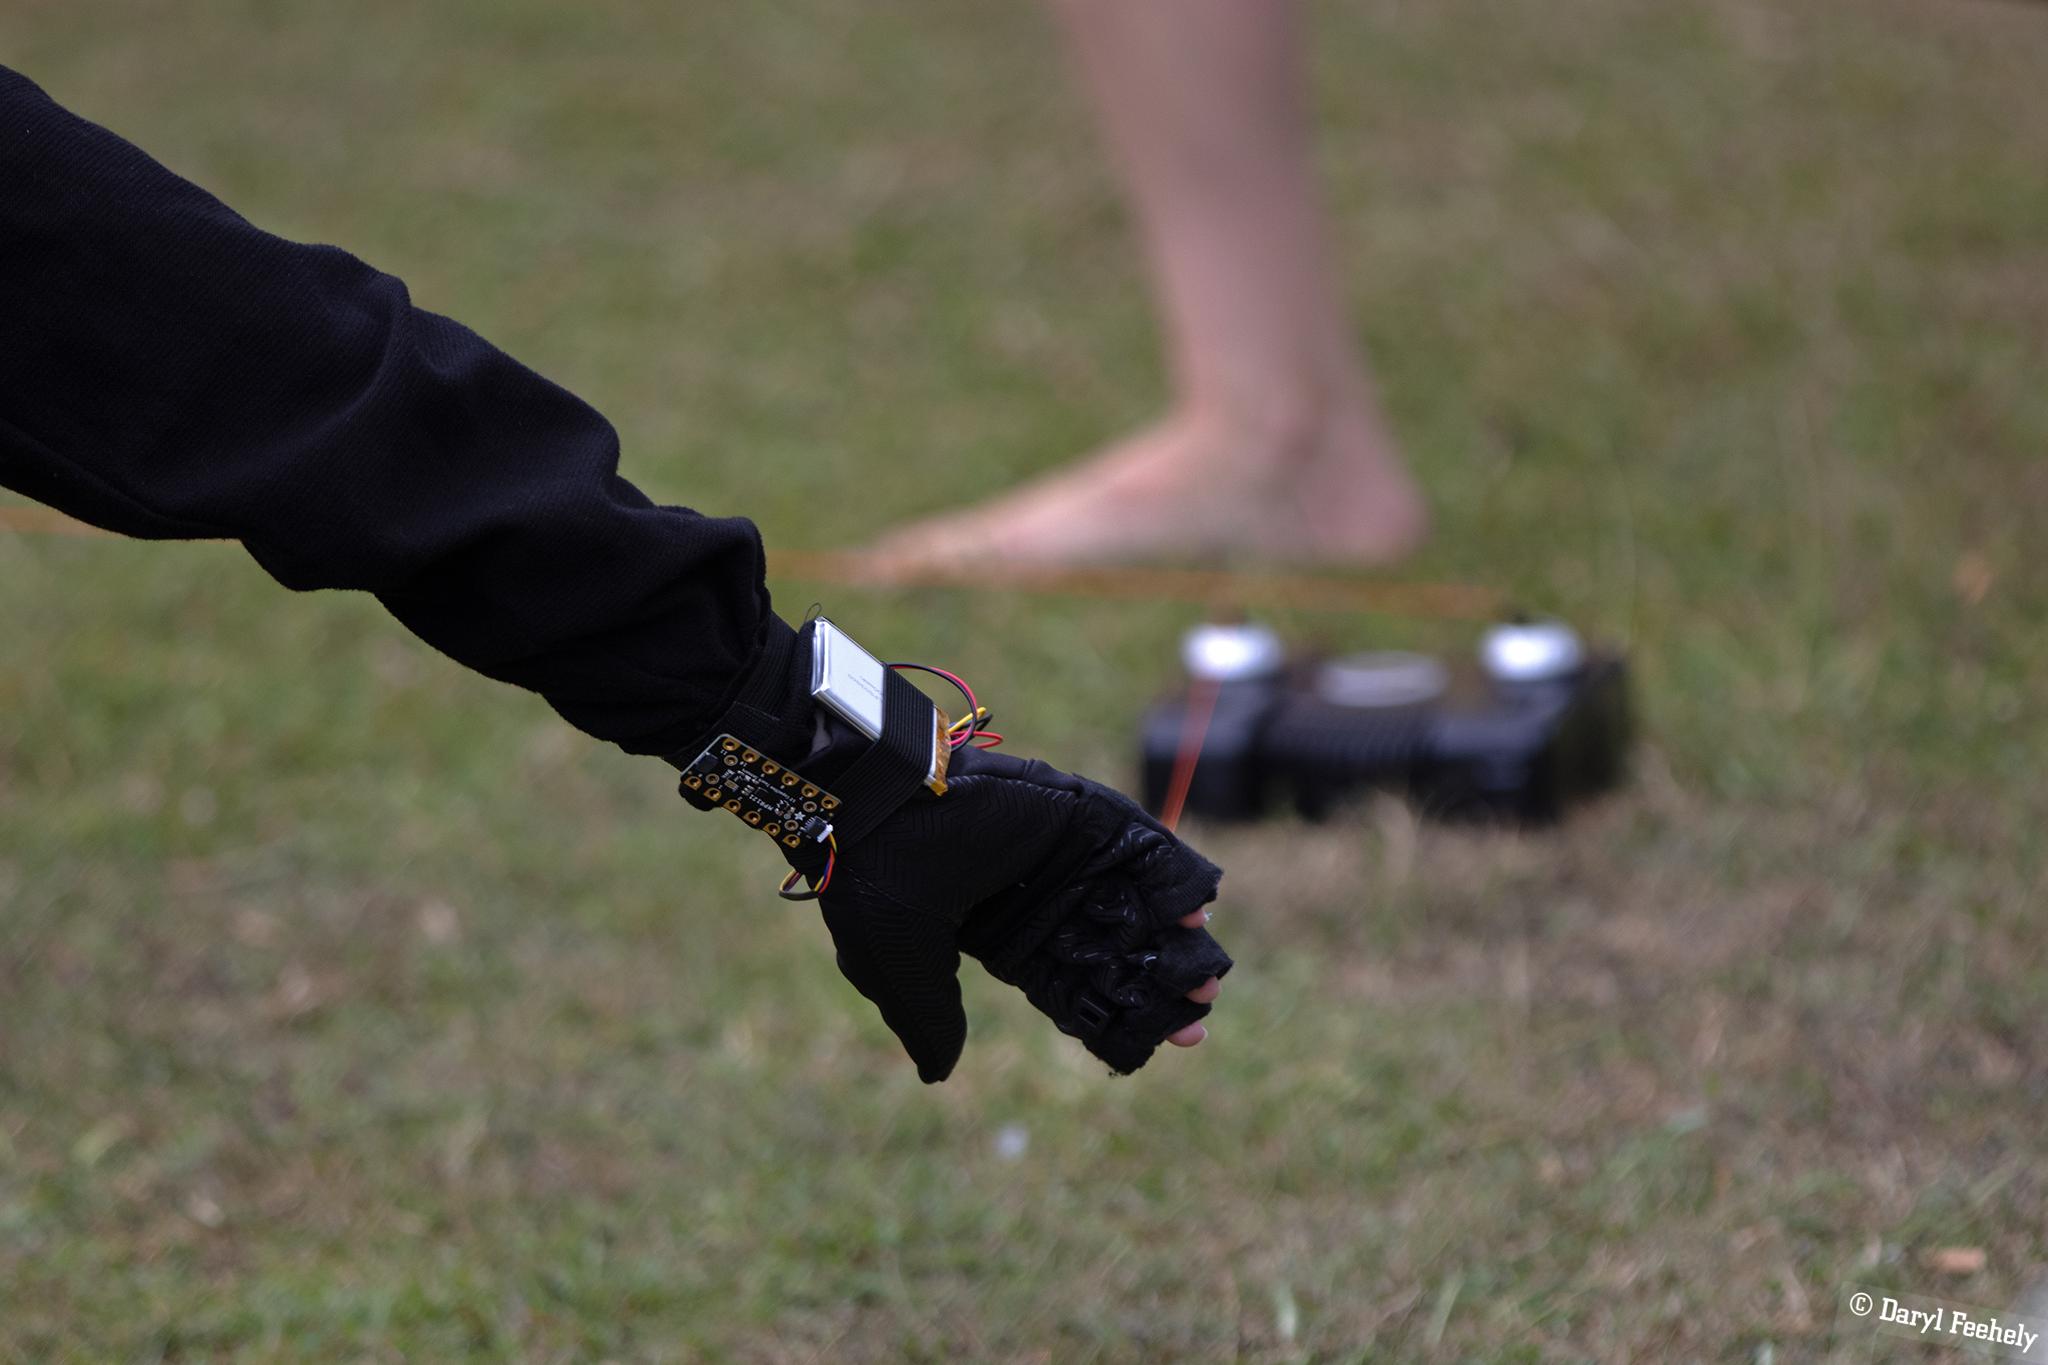 arm wearing electronic glove, gametrak and foot on grass